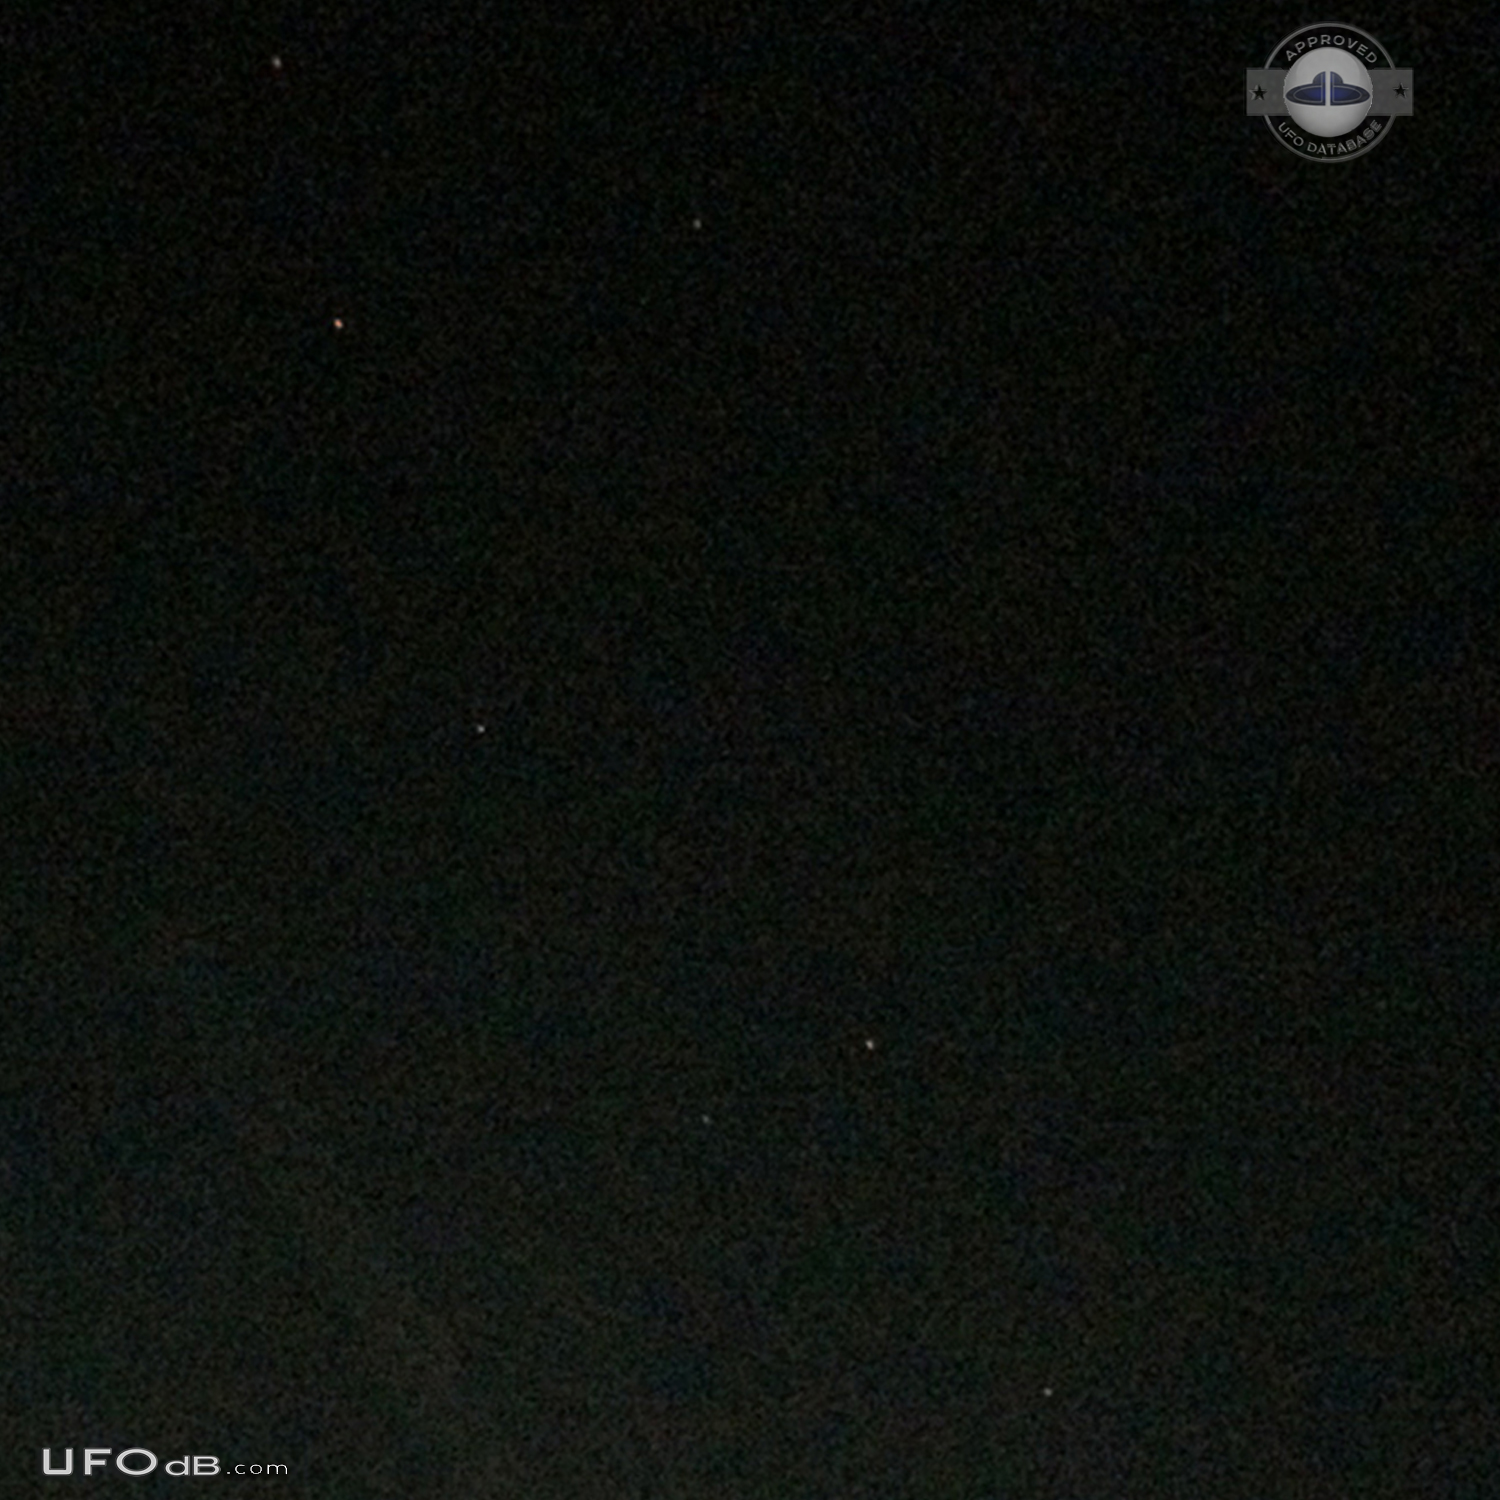 7 red star like UFO ascended above cloud - Cambodia 2015 UFO Picture #676-3